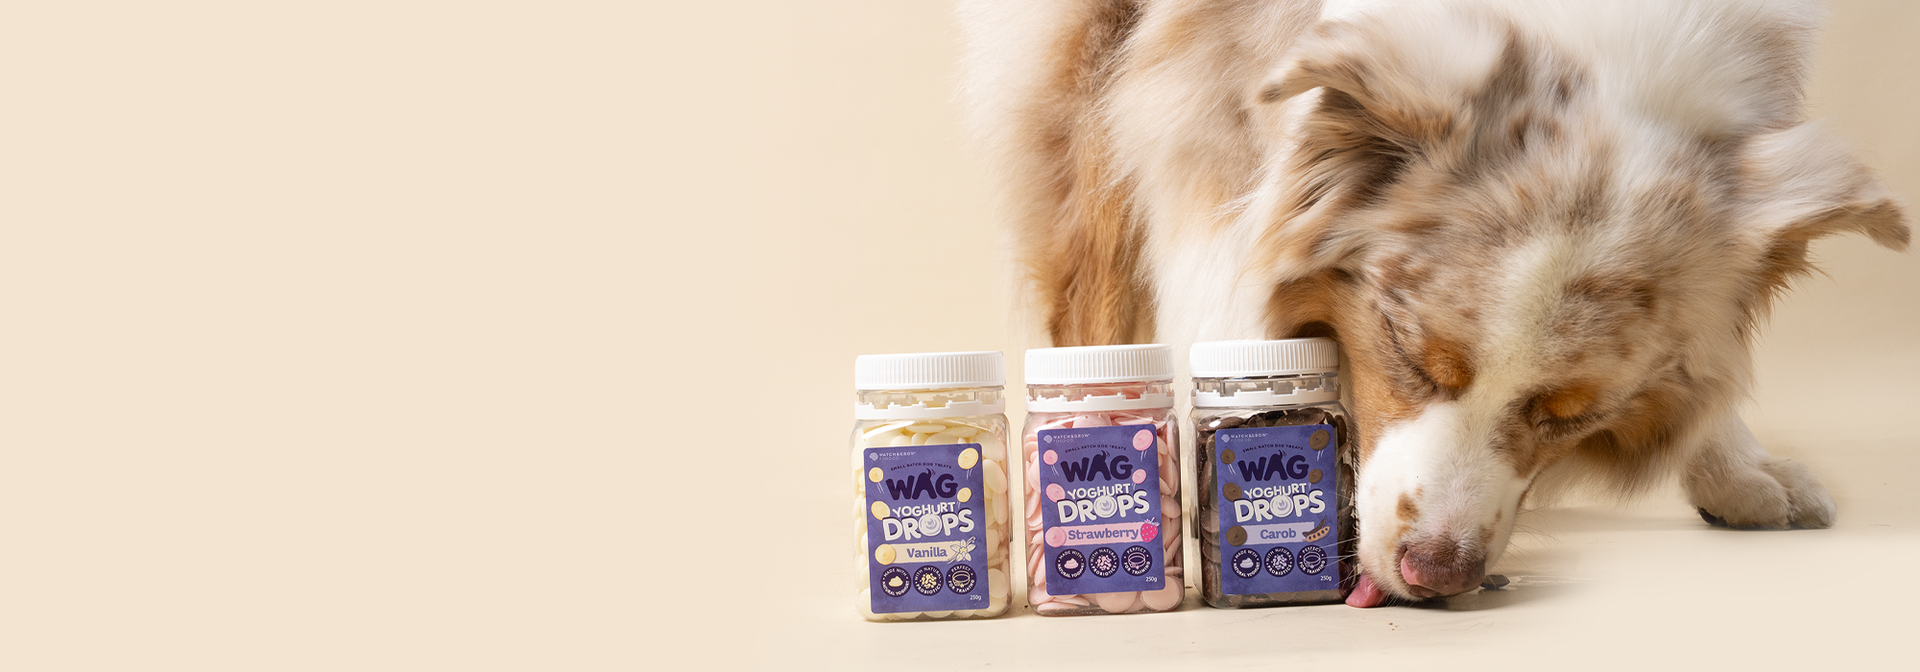 WAG Yoghurt drops for dogs